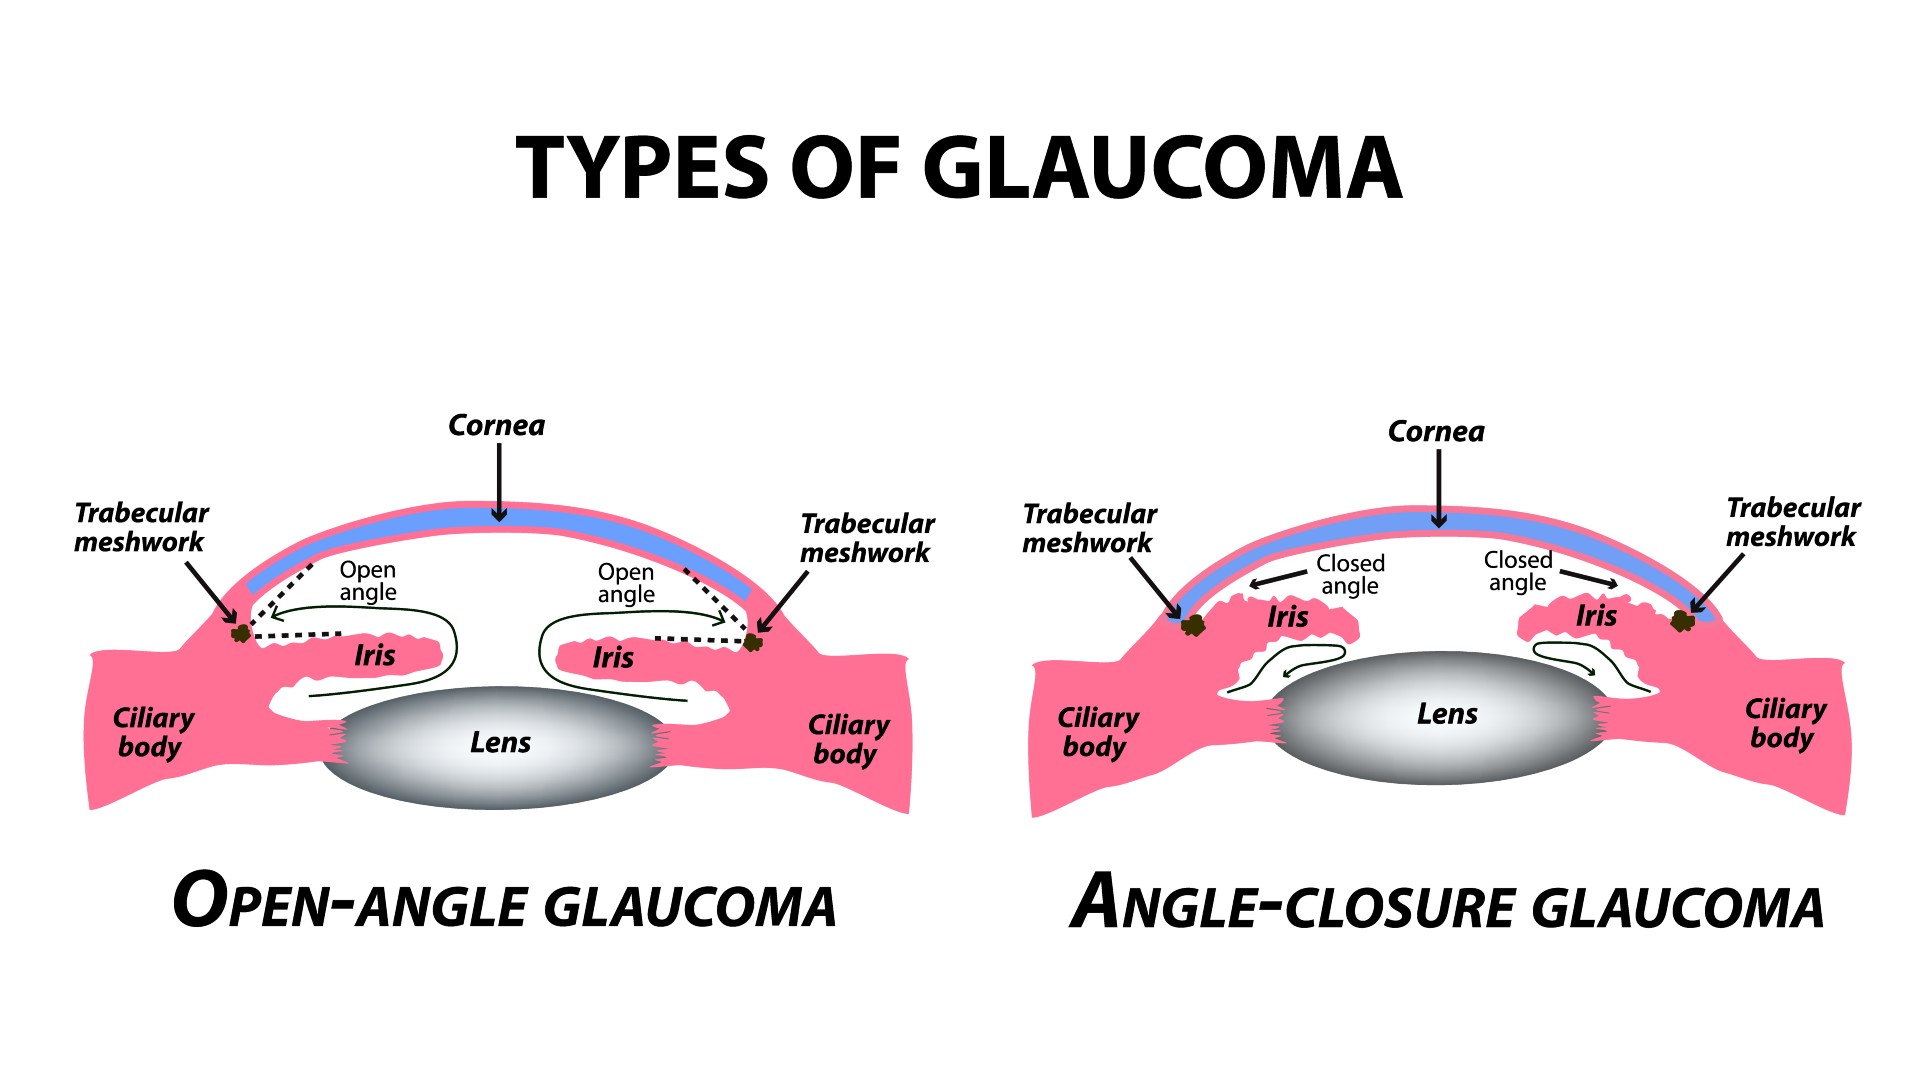 Infographic of the two main types of glaucoma - Open-angle and angle-closure glaucoma. Timonina via Shutterstock